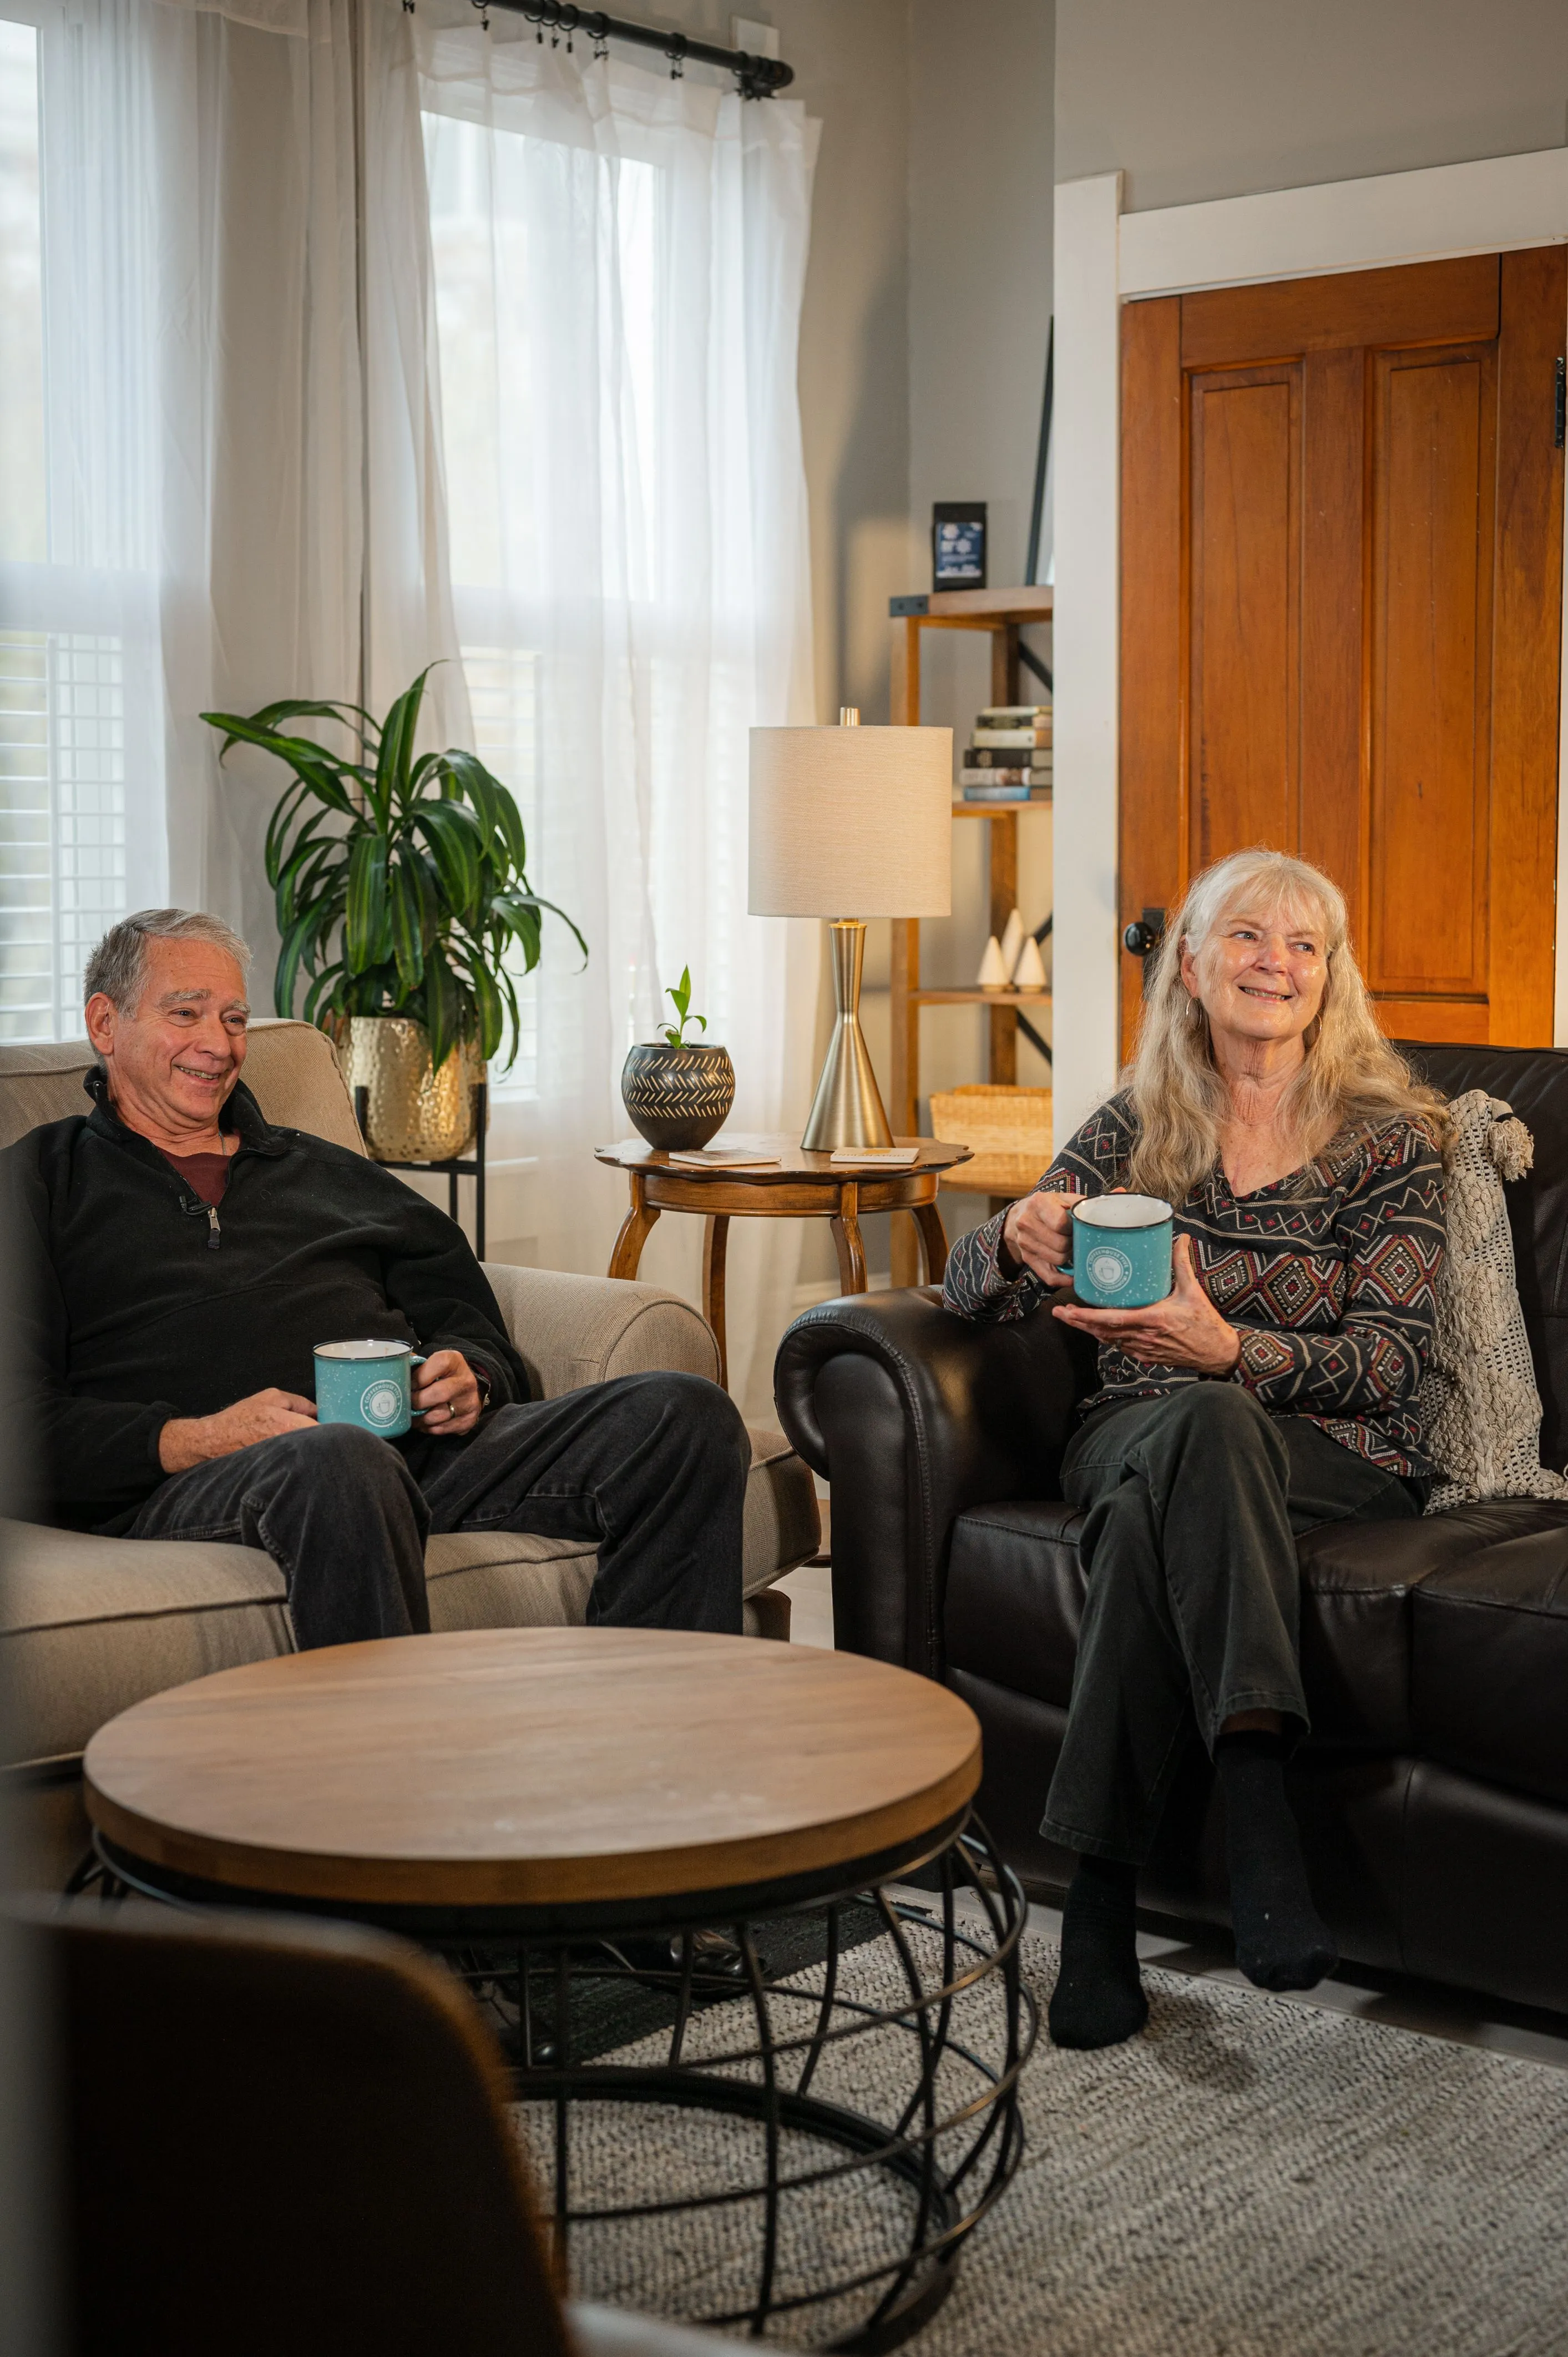 An elderly couple smiling and relaxing in a cozy living room with mugs in their hands.